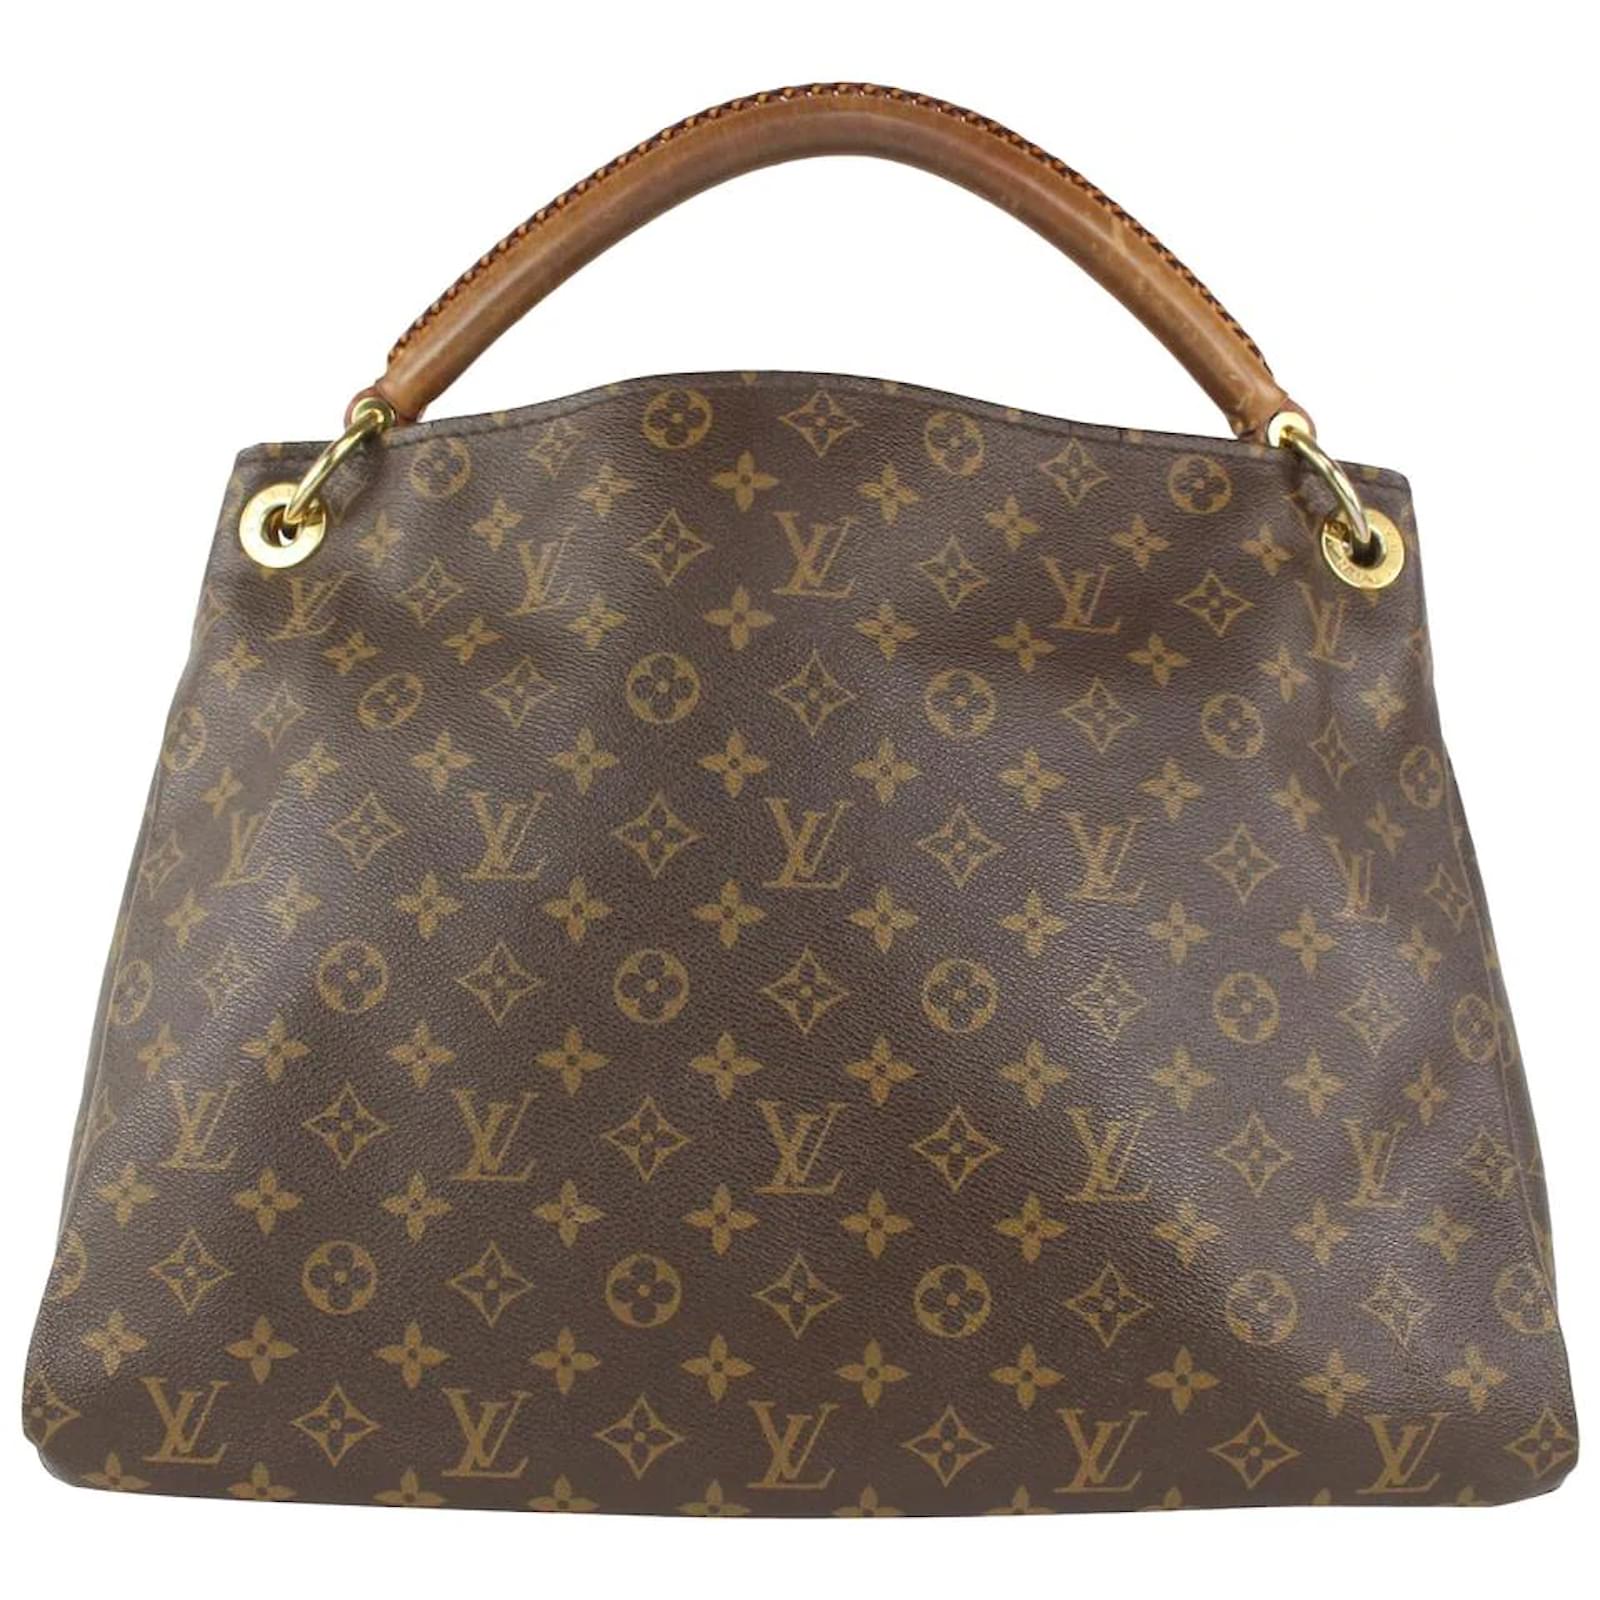 Louis Vuitton Artsy MM Monogram Hobo with Braided Handle $1295